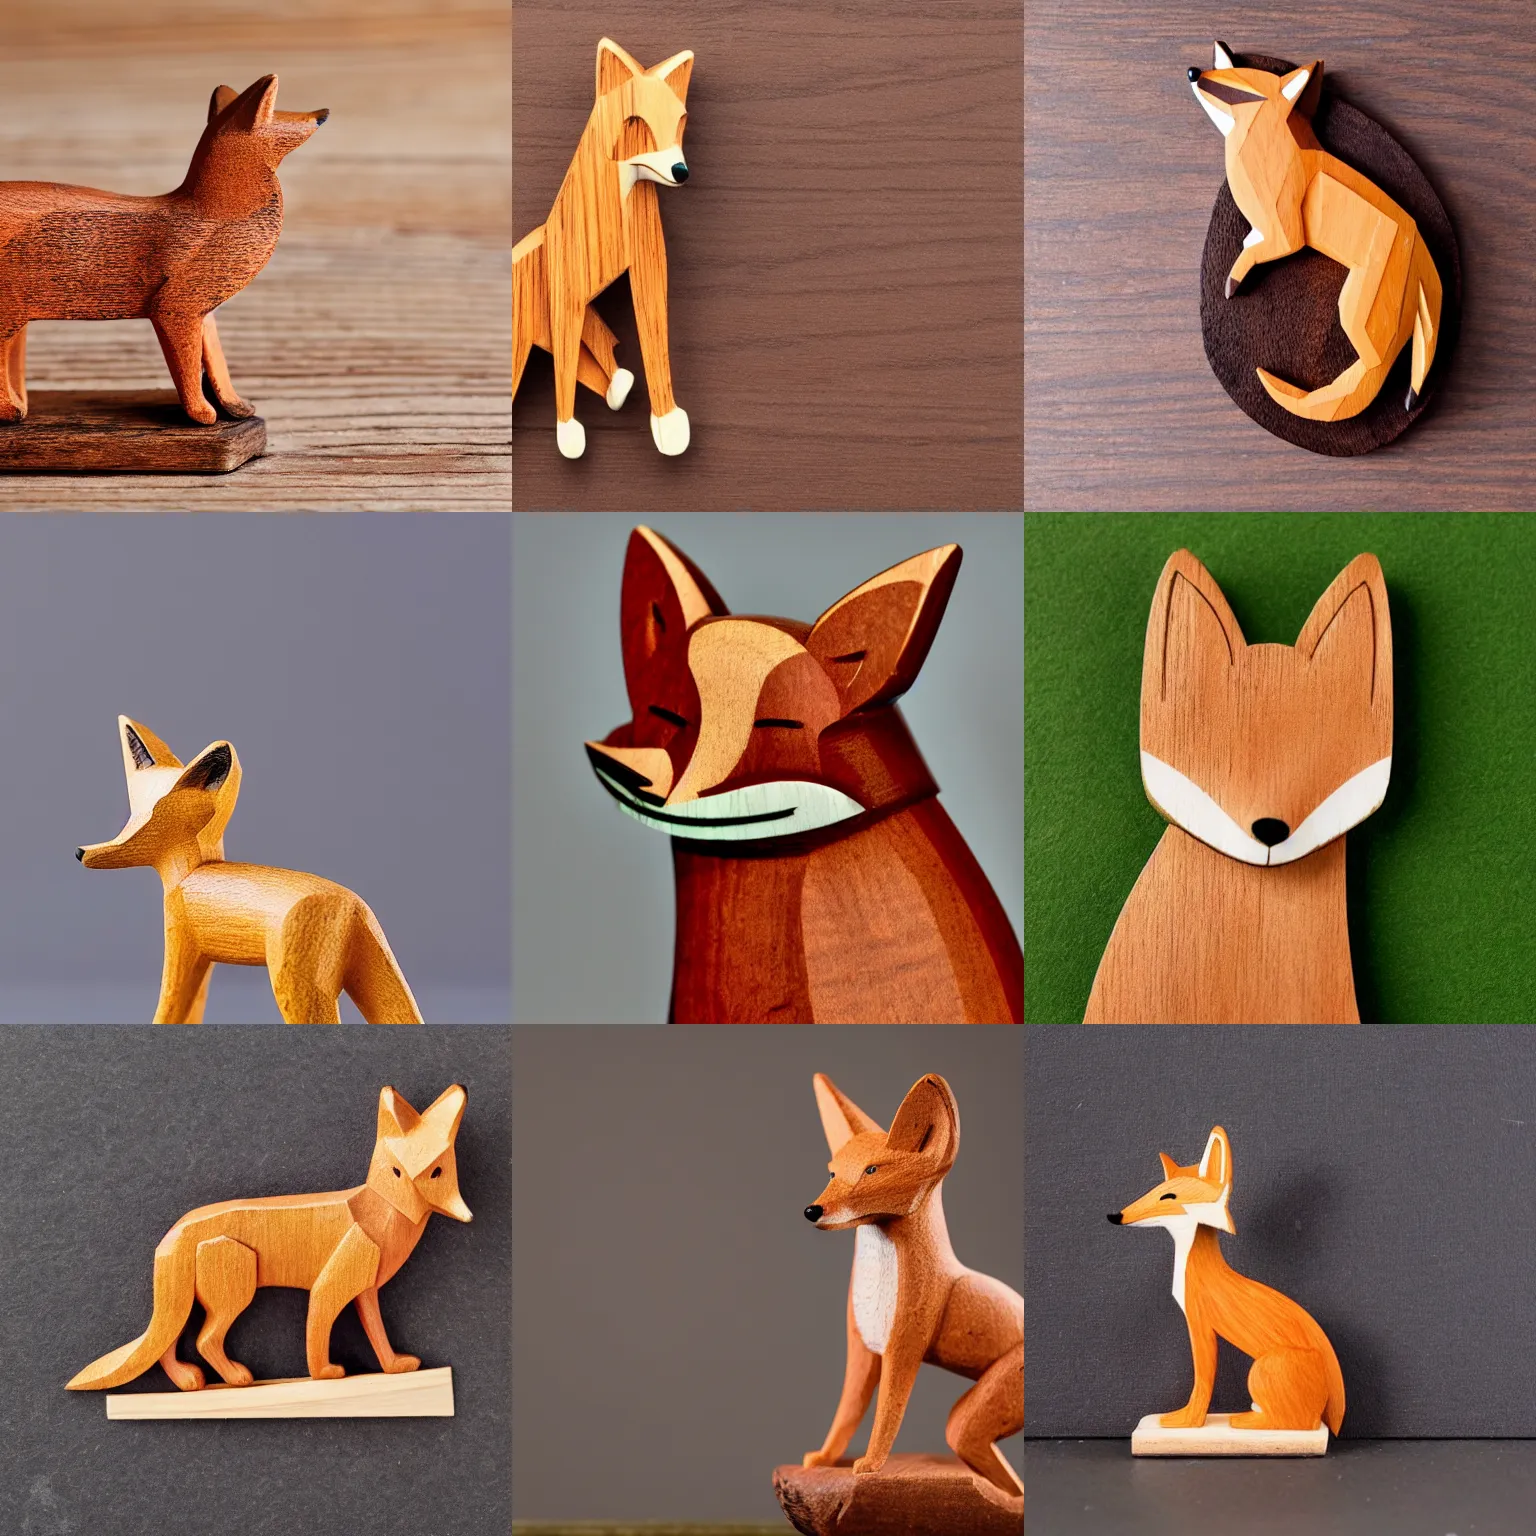 Prompt: A wooden statuette of a fox on a cracker. solid Background.